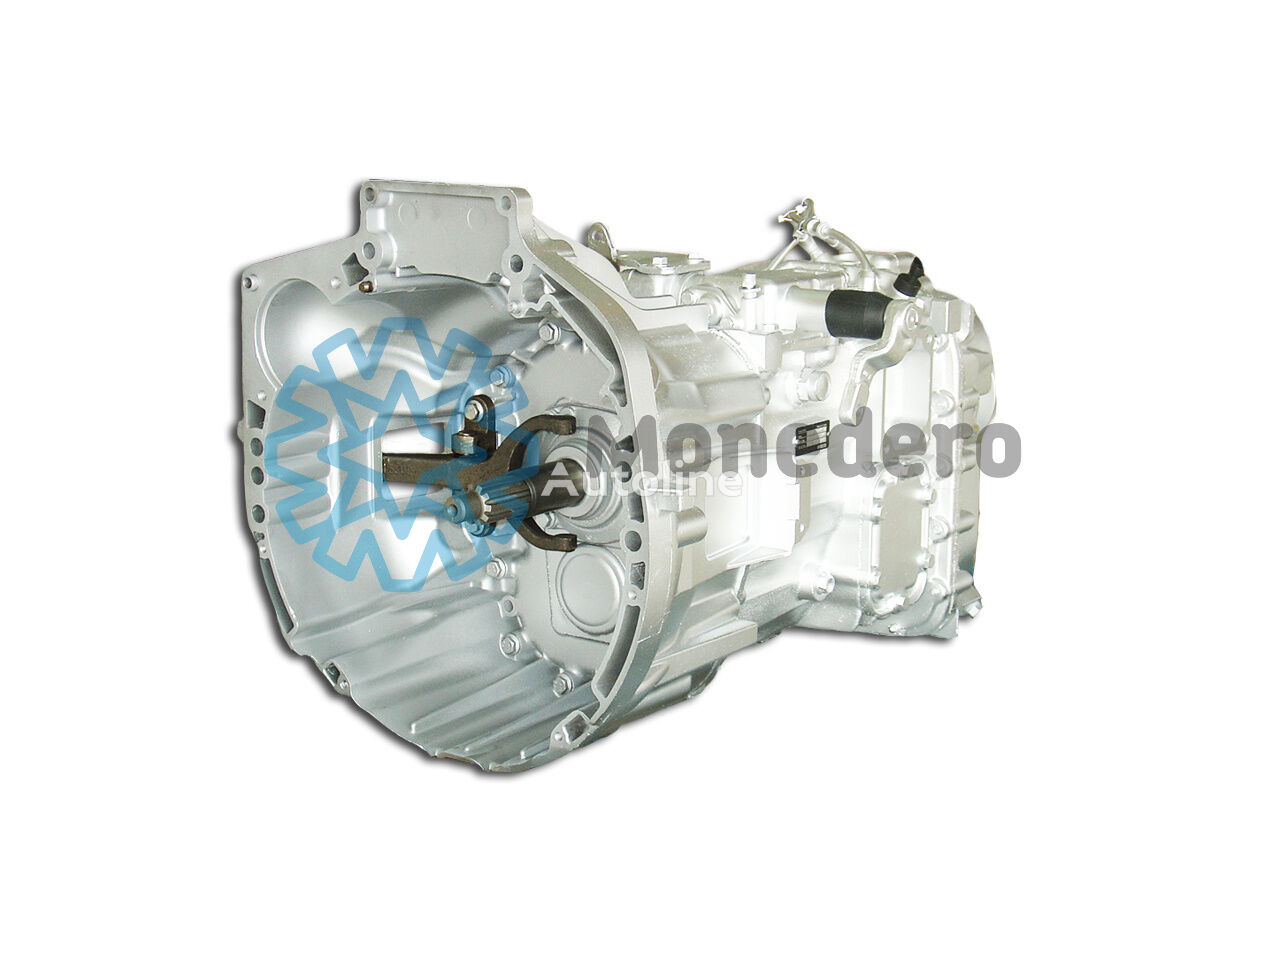 IVECO 2826.5, 2830.5, 2835.6, 2840.6, 2850.6, 2855.6, 2865.6, 2870.9, gearbox for IVECO truck